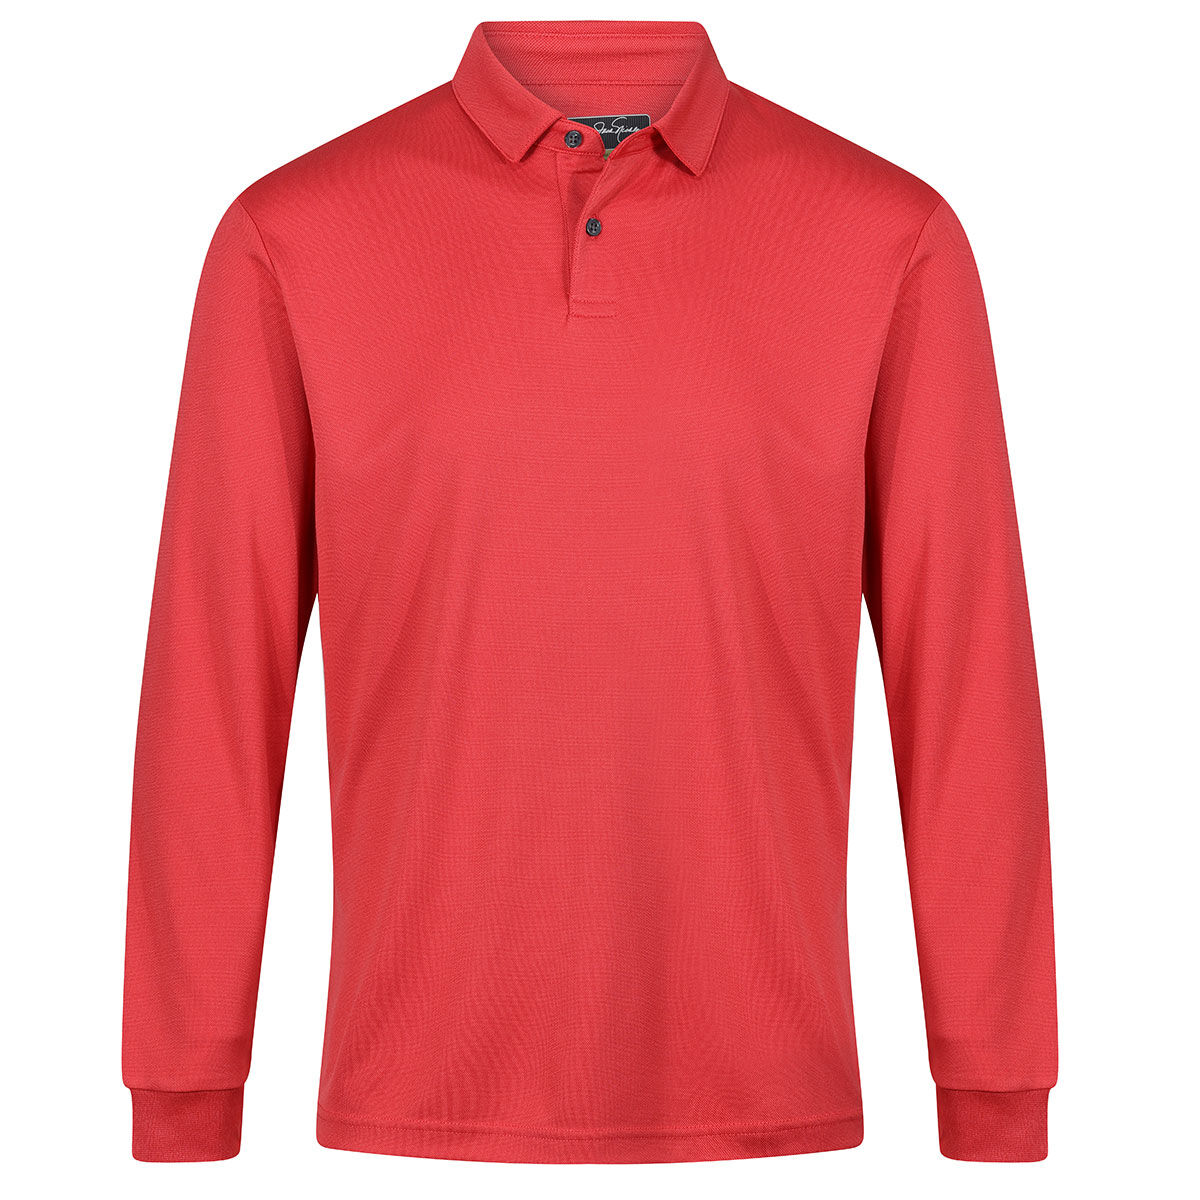 Jack Nicklaus Men’s Classic Long Sleeve Golf Polo Shirt, Mens, Red, Large | American Golf